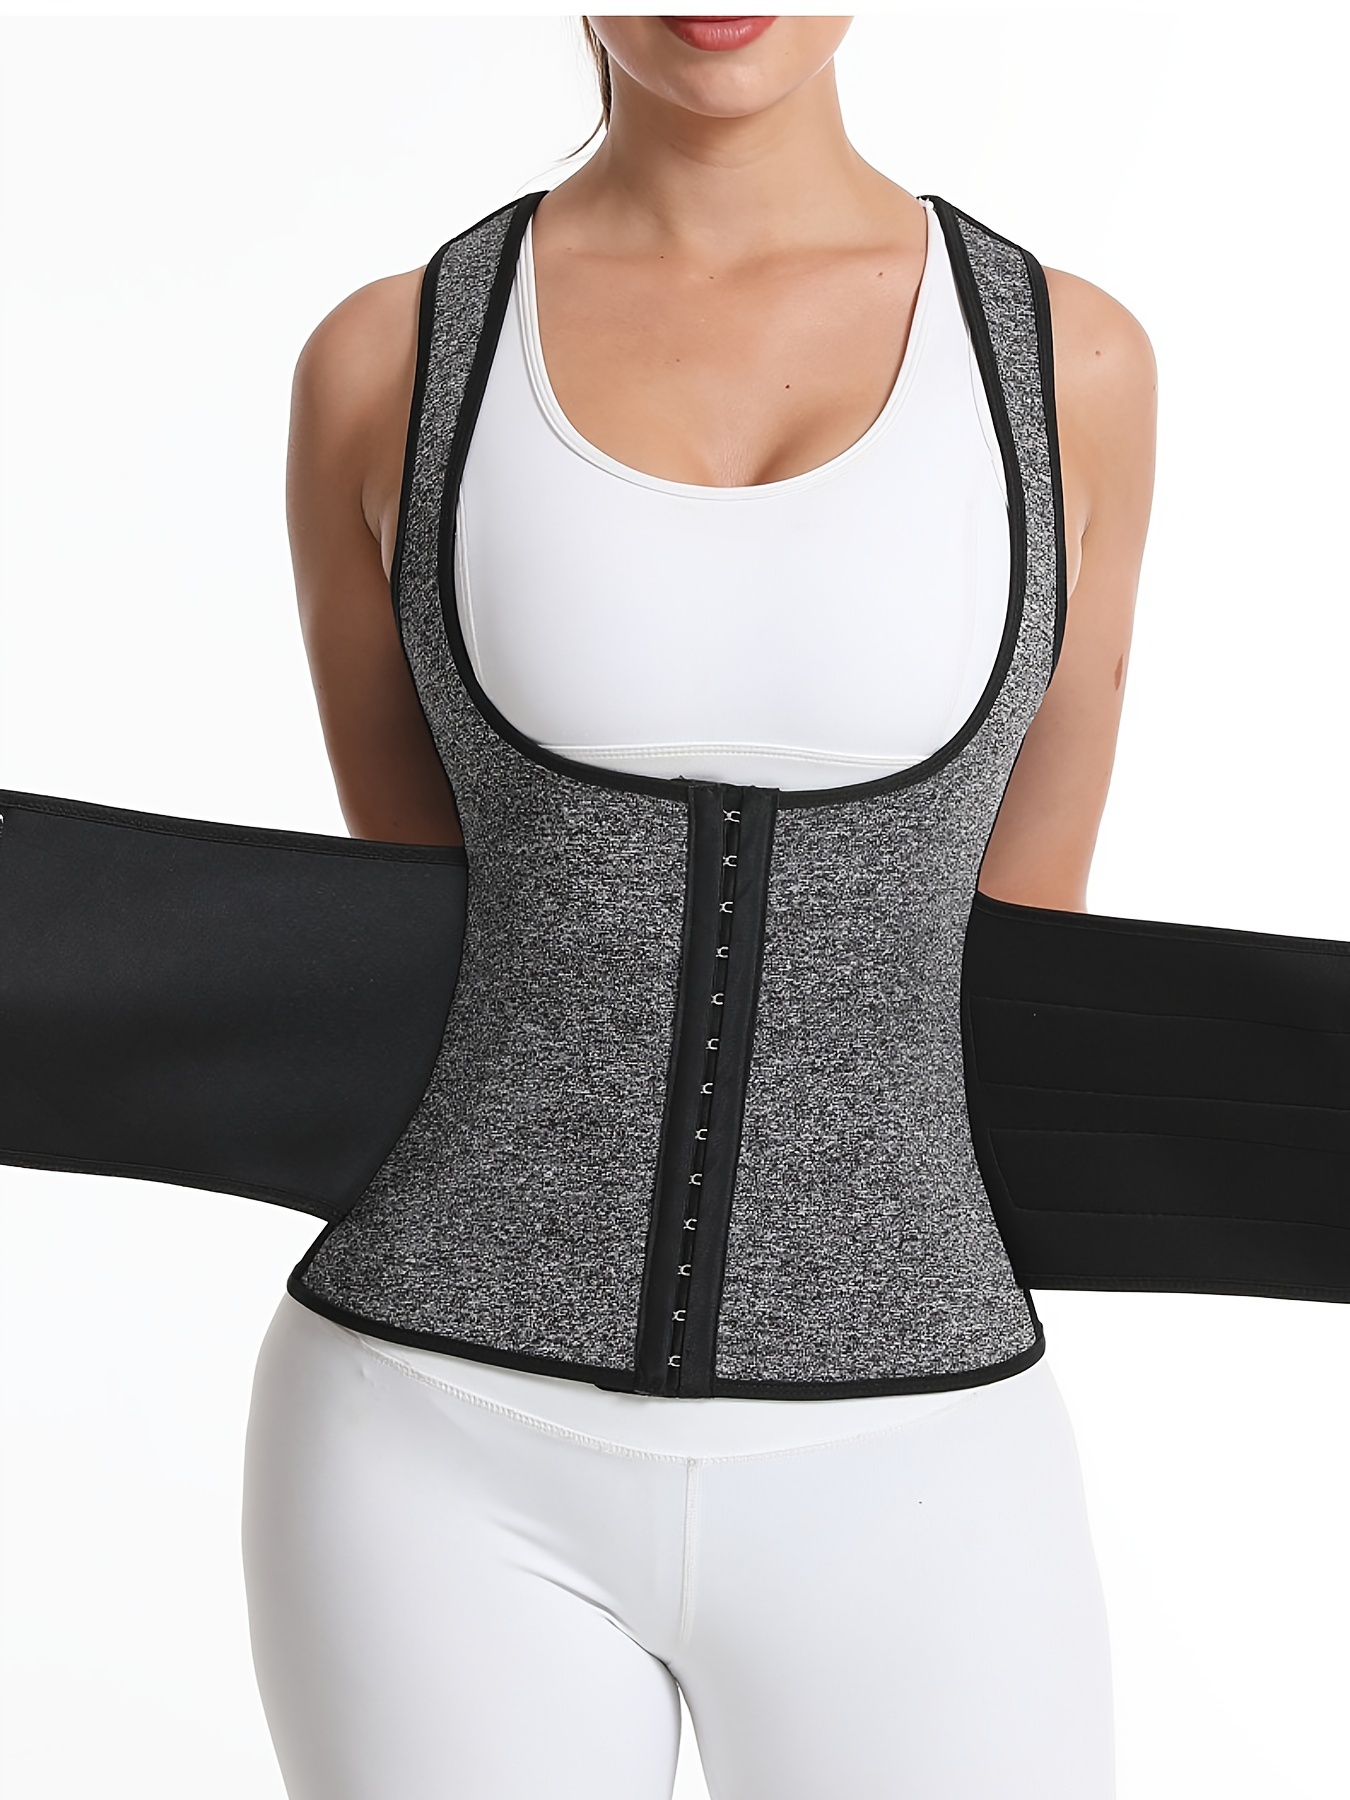 Polymer Womens Sauna Sweat Vest For Weight Loss, Tummy Slimming, And Body  Shaping Fajas Top With Flat Stomach Waist Trainer And Shapewear Sheath For  Workout 210305 From Dang09, $9.64